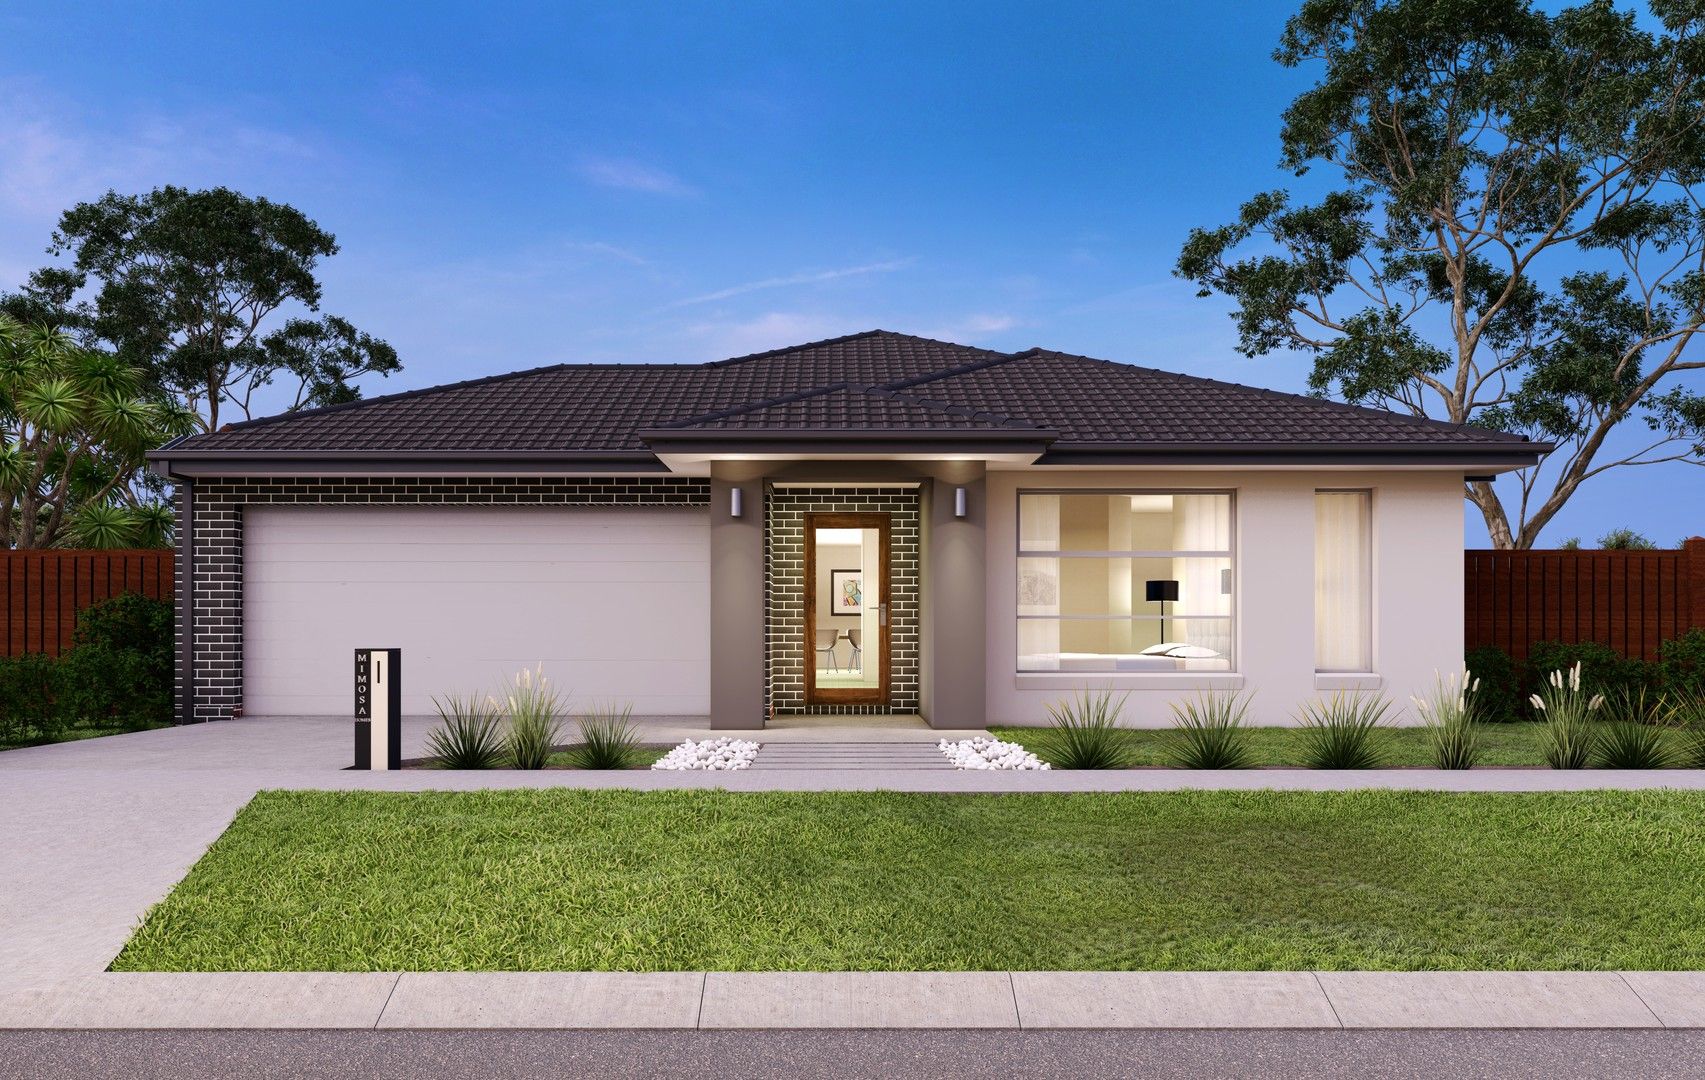 4 bedrooms New House & Land in LOT 712 Taylors Run Estate FRASER RISE VIC, 3336